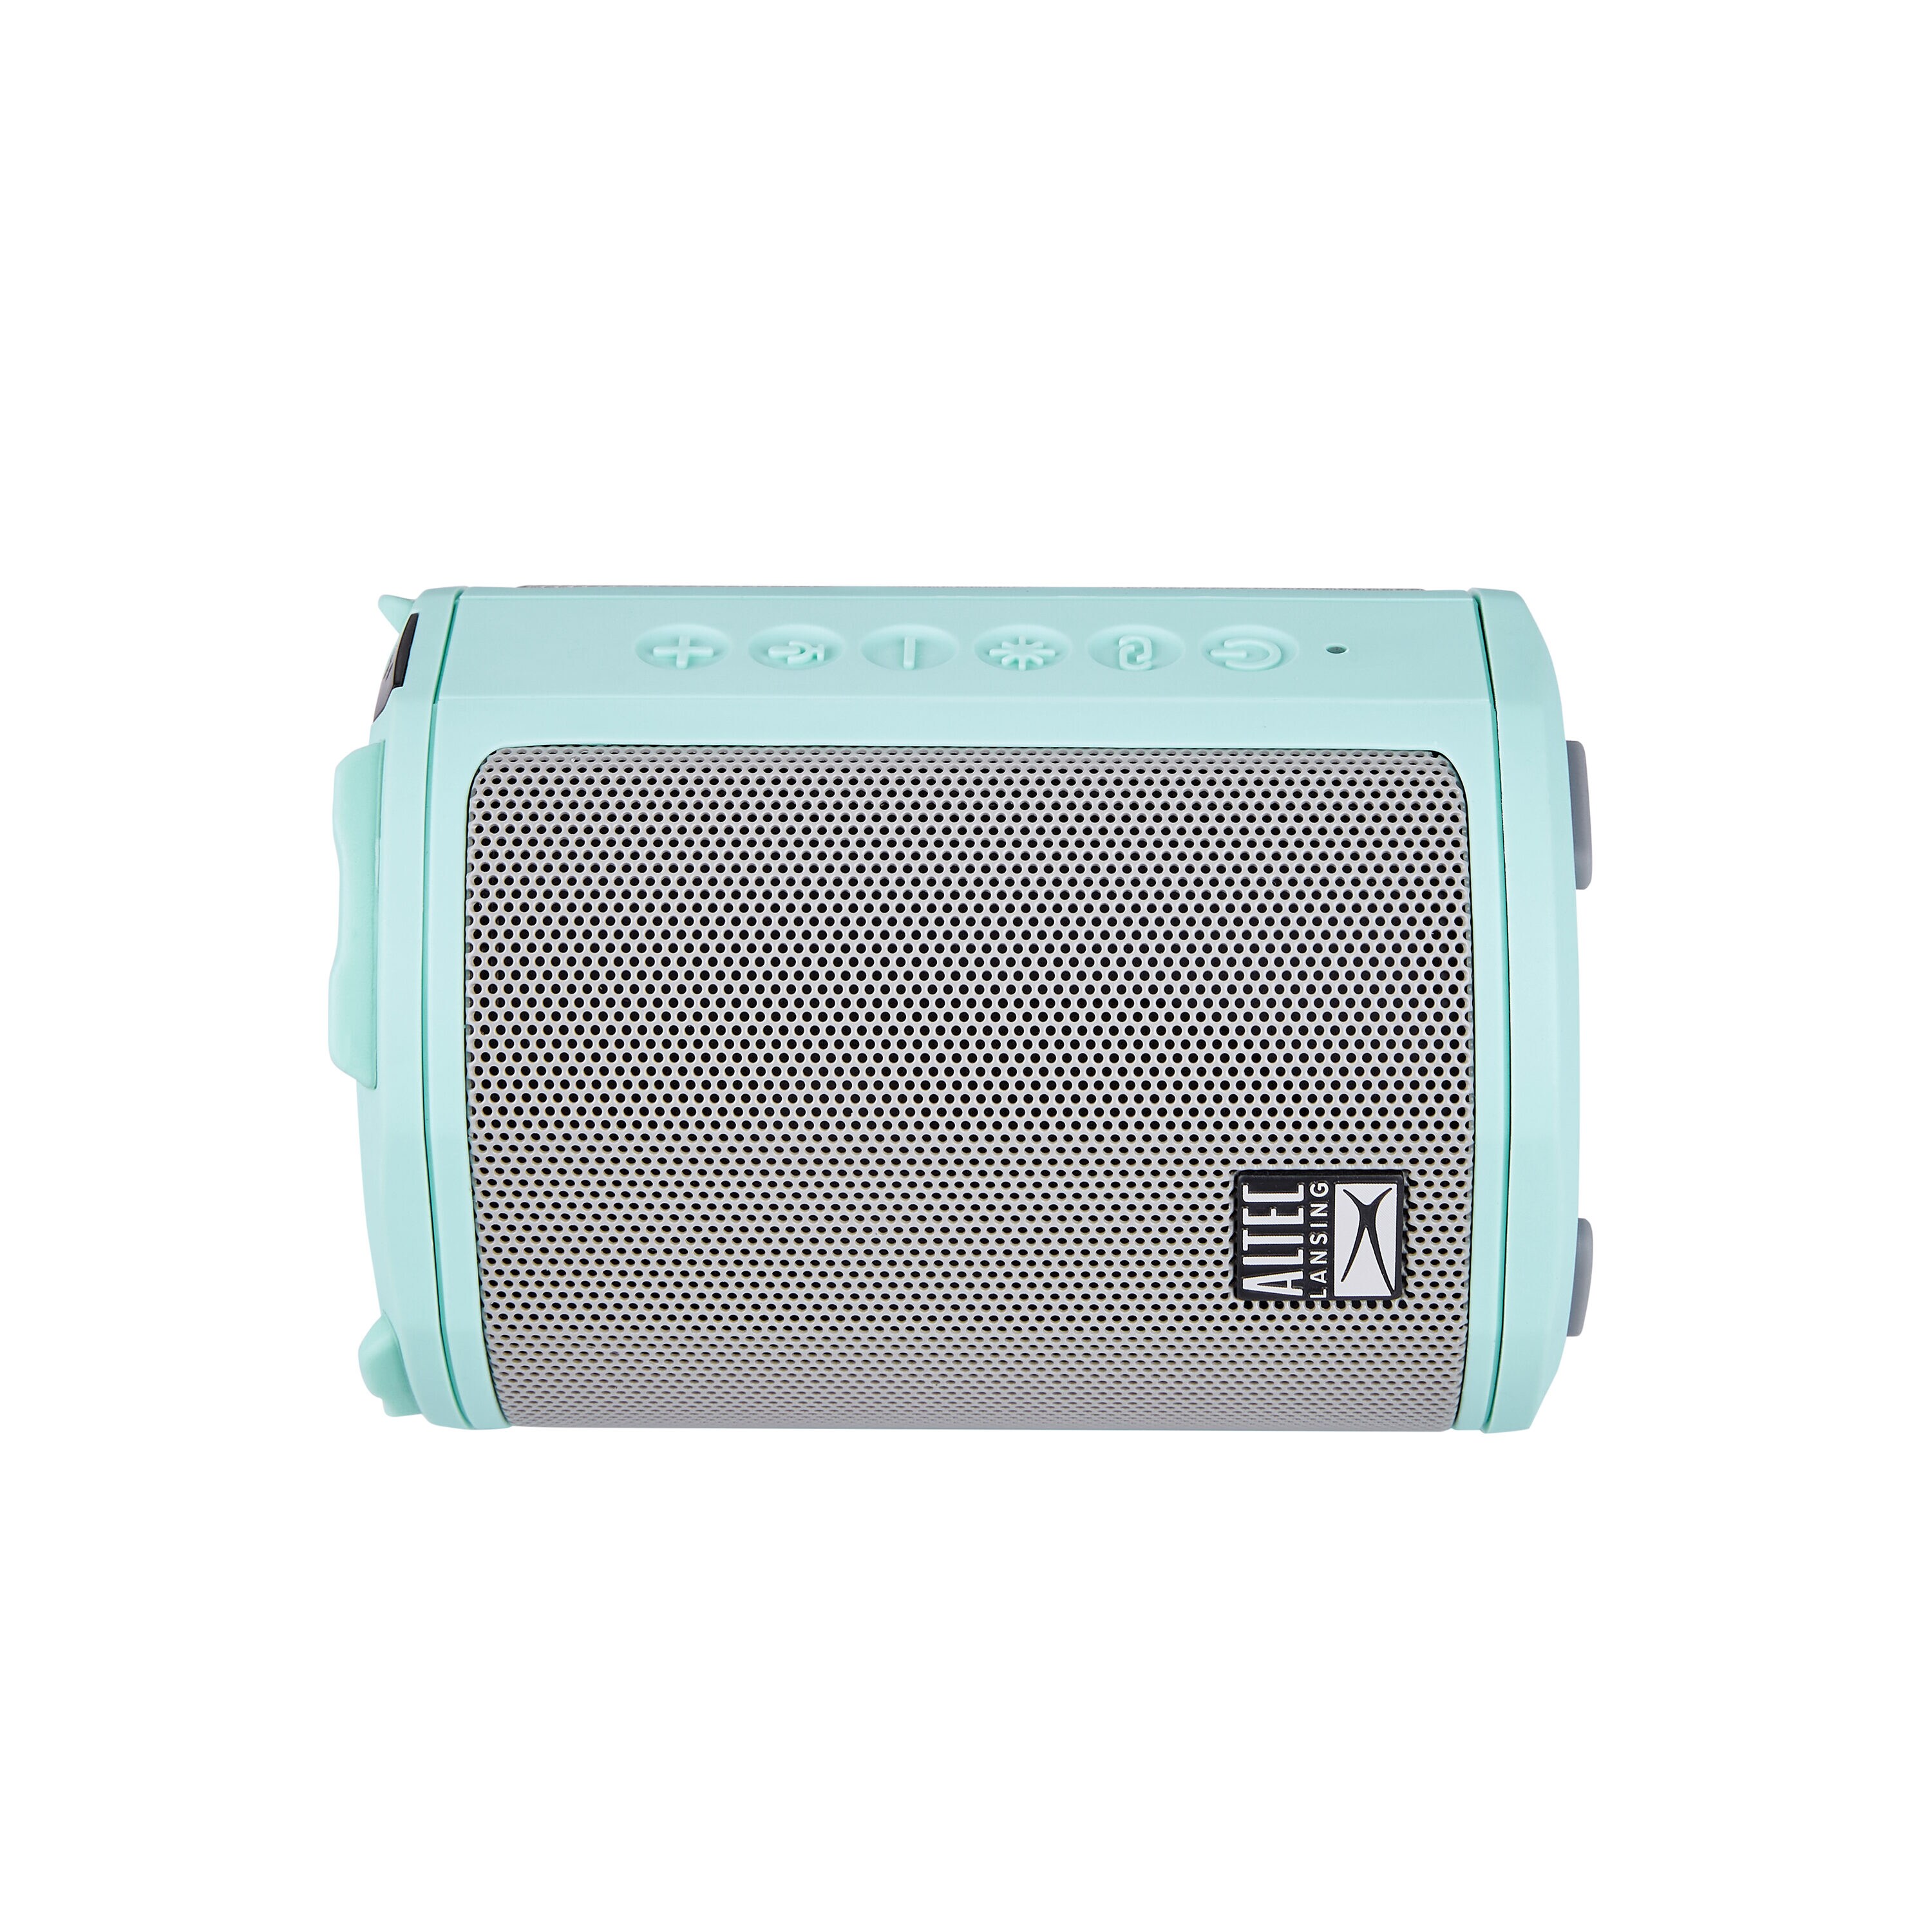 Altec Lansing HydraMotion Everything Proof Portable Wireless